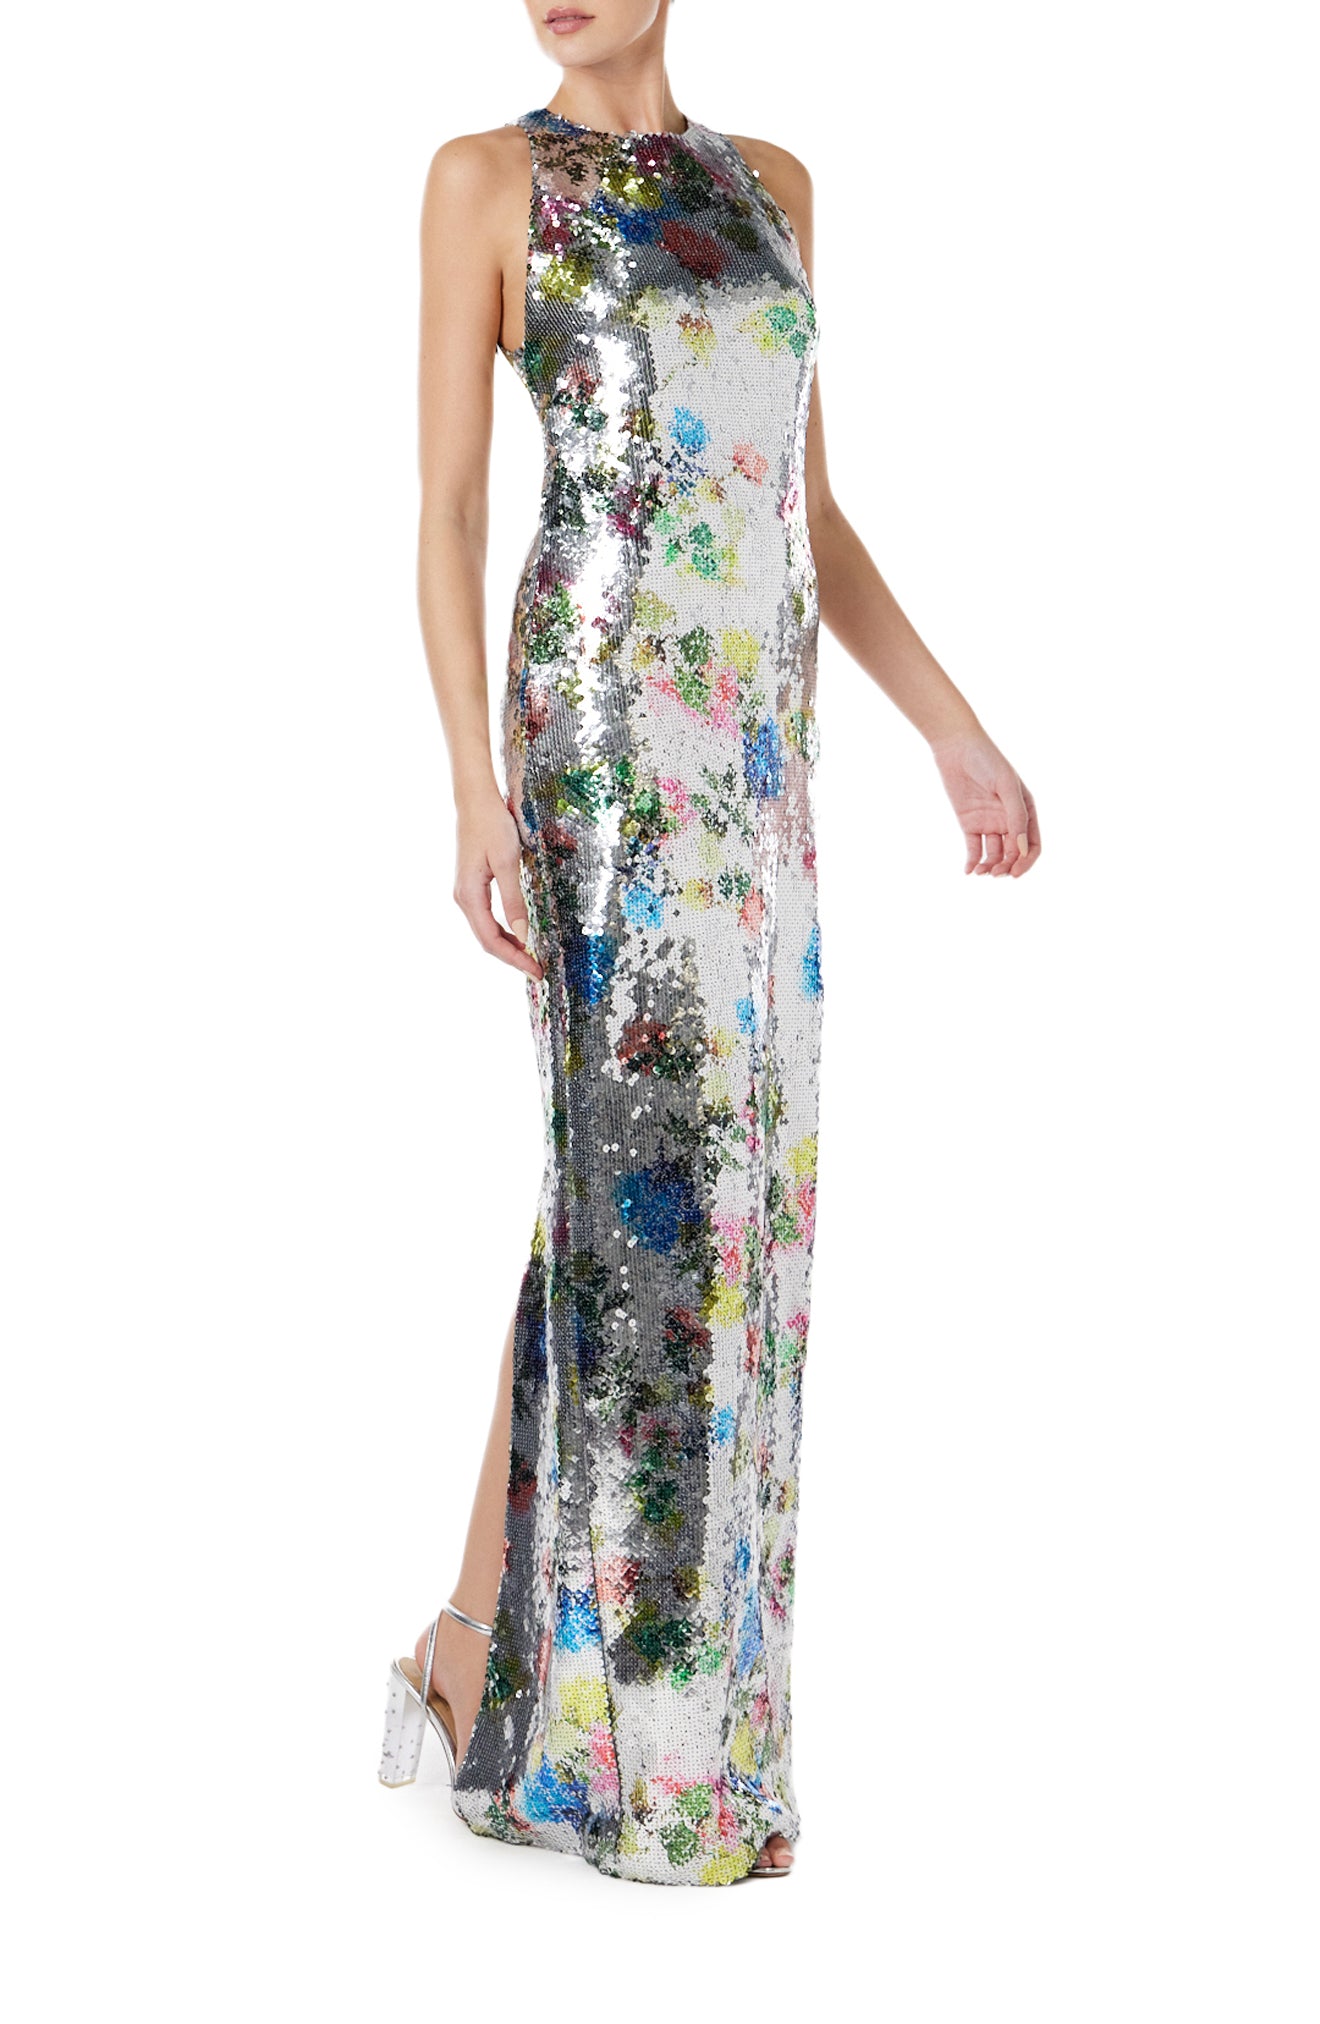 Monique Lhuillier Spring 2024 printed silver sequin colum gown with sleeveless, cut-away neckline - right side two.